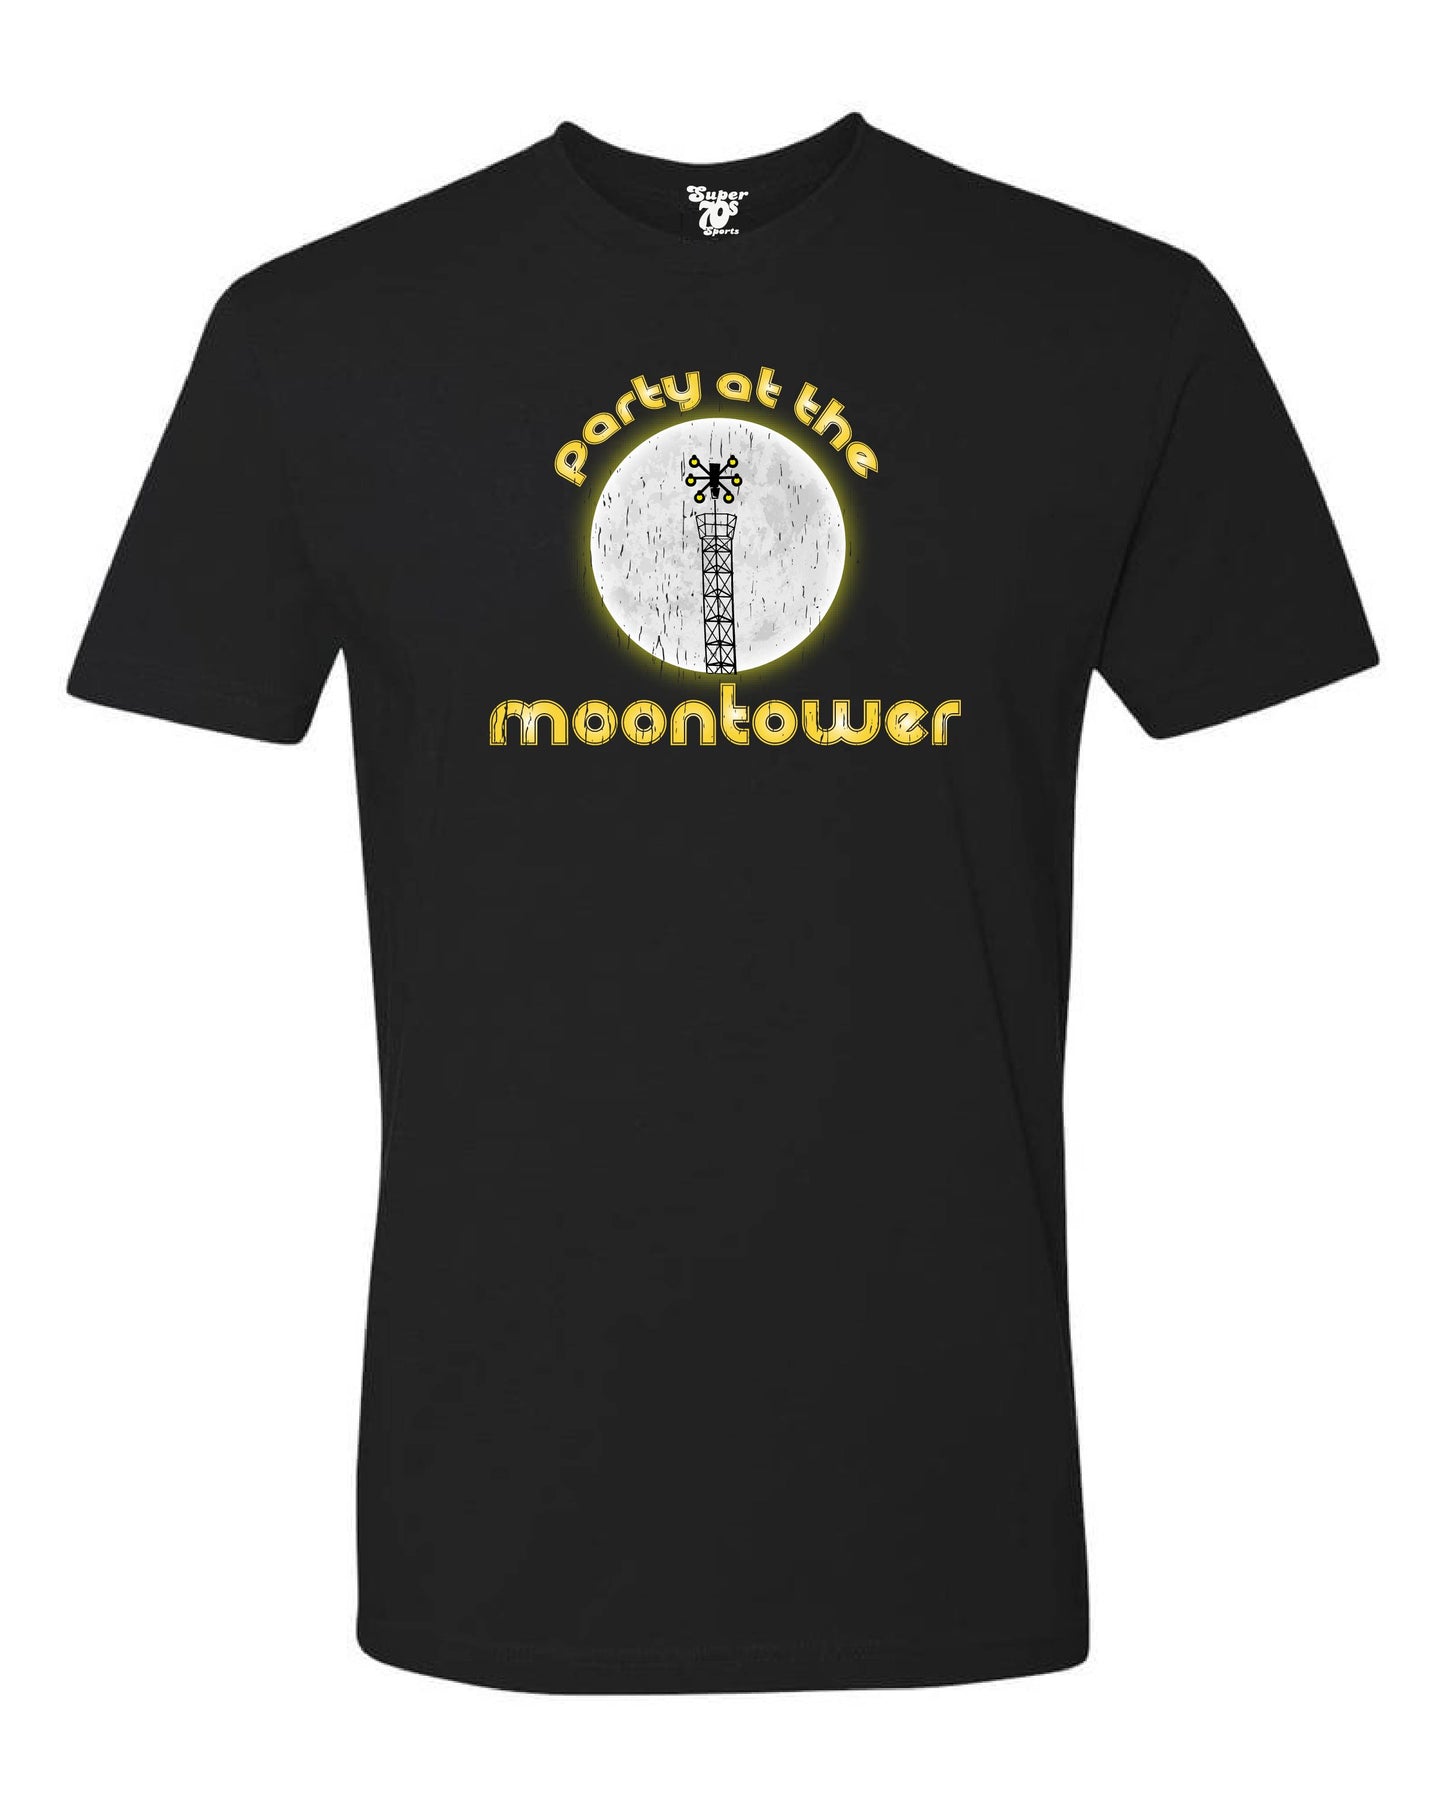 Party at the Moontower Tee